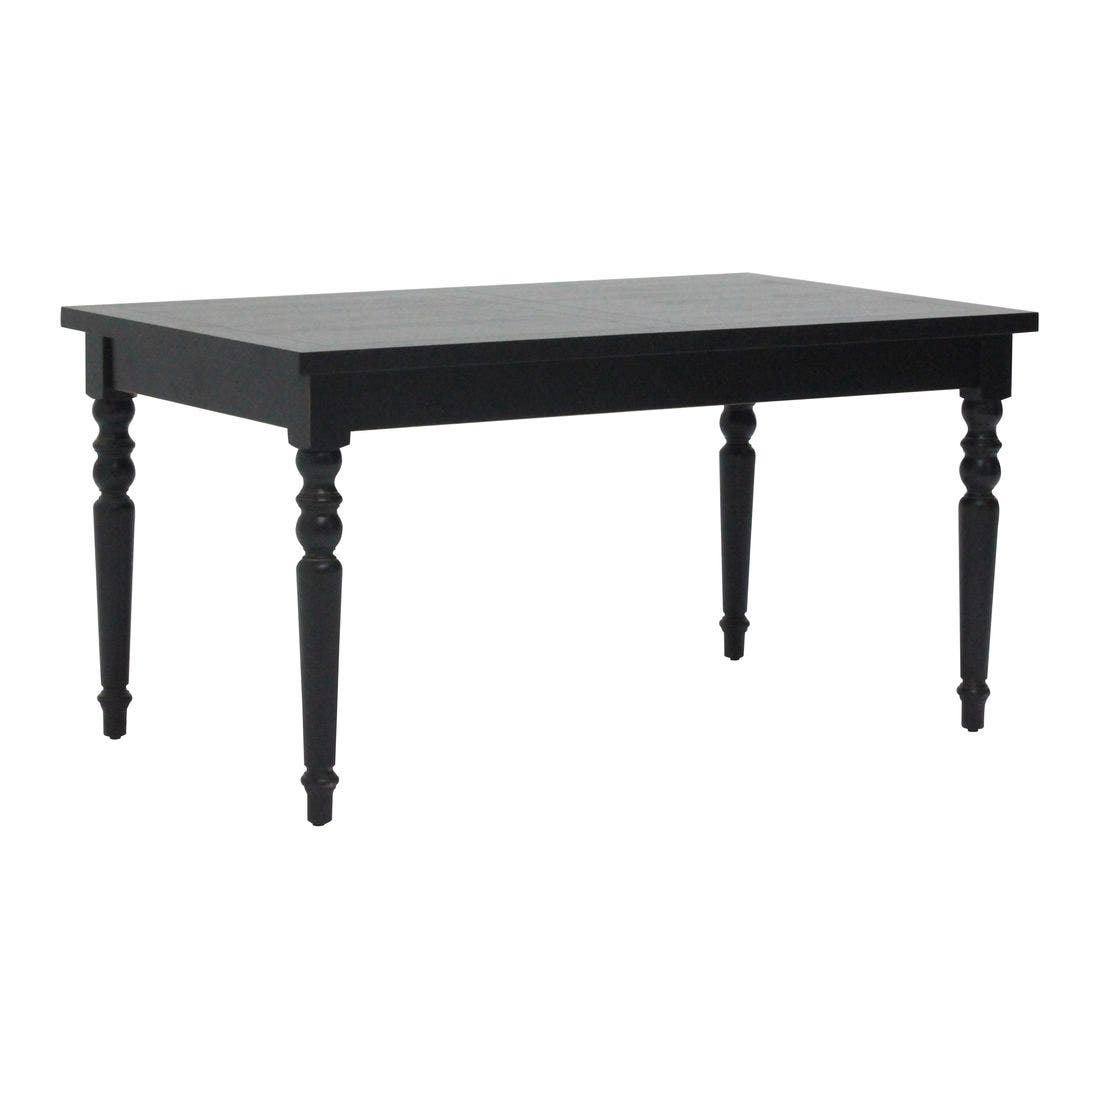 19150750-amonlo-furniture-dining-room-dining-tables-01